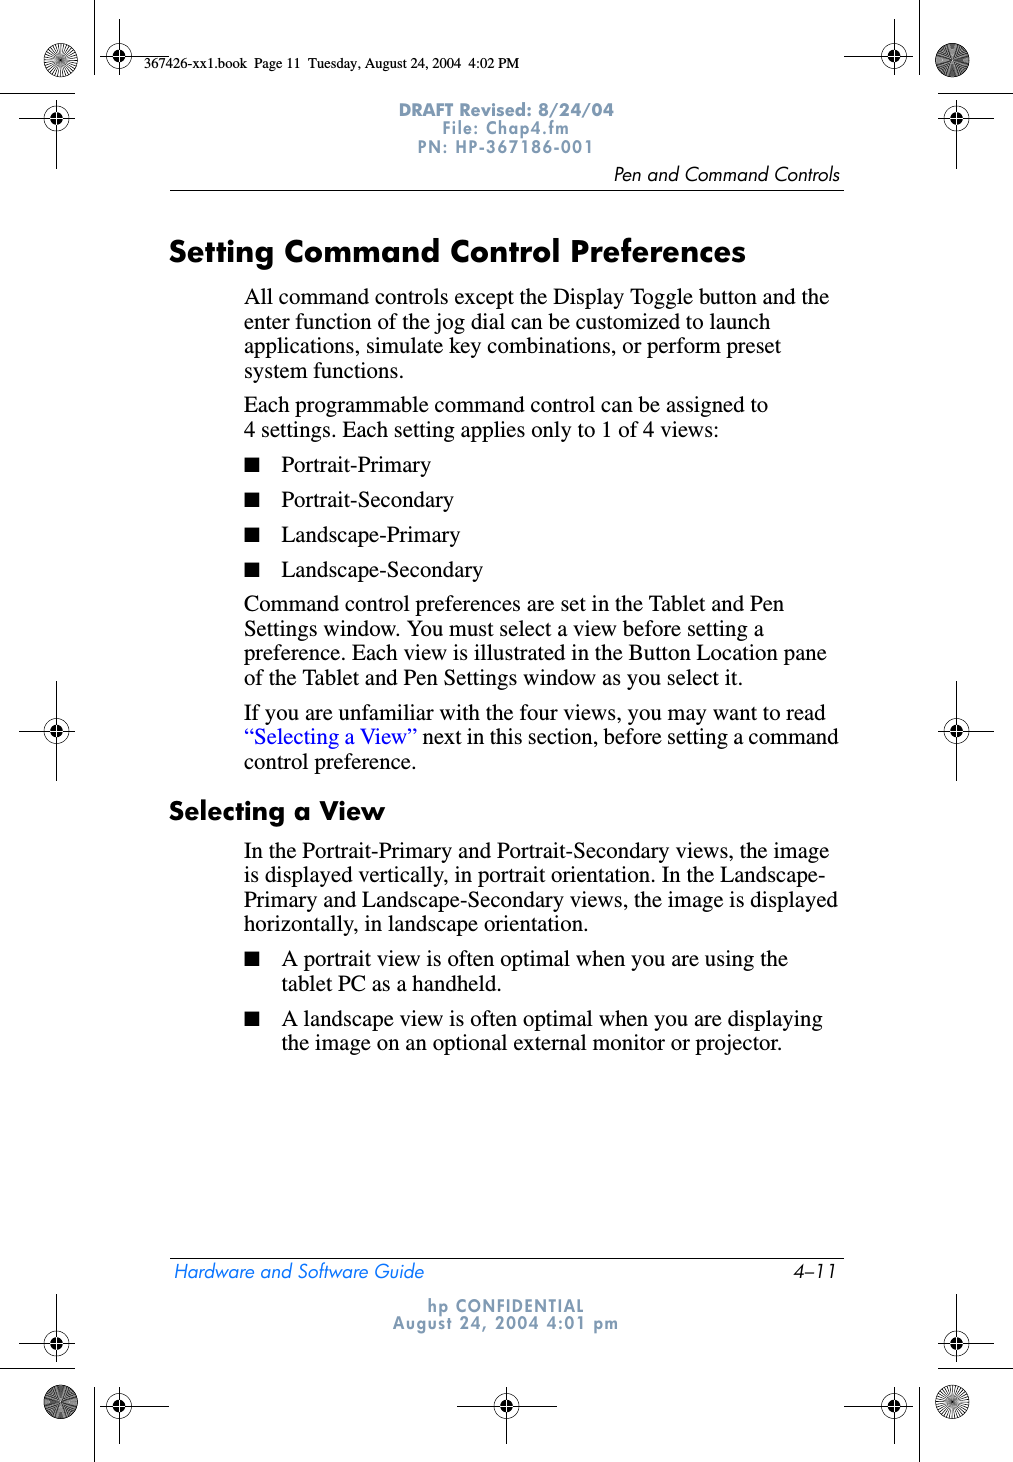 Pen and Command ControlsHardware and Software Guide 4–11DRAFT Revised: 8/24/04File: Chap4.fm PN: HP-367186-001 hp CONFIDENTIALAugust 24, 2004 4:01 pmSetting Command Control PreferencesAll command controls except the Display Toggle button and the enter function of the jog dial can be customized to launch applications, simulate key combinations, or perform preset system functions.Each programmable command control can be assigned to 4 settings. Each setting applies only to 1 of 4 views:■Portrait-Primary■Portrait-Secondary■Landscape-Primary ■Landscape-SecondaryCommand control preferences are set in the Tablet and Pen Settings window. You must select a view before setting a preference. Each view is illustrated in the Button Location pane of the Tablet and Pen Settings window as you select it.If you are unfamiliar with the four views, you may want to read “Selecting a View” next in this section, before setting a command control preference. Selecting a ViewIn the Portrait-Primary and Portrait-Secondary views, the image is displayed vertically, in portrait orientation. In the Landscape- Primary and Landscape-Secondary views, the image is displayed horizontally, in landscape orientation.■A portrait view is often optimal when you are using the tablet PC as a handheld. ■A landscape view is often optimal when you are displaying the image on an optional external monitor or projector.367426-xx1.book  Page 11  Tuesday, August 24, 2004  4:02 PM